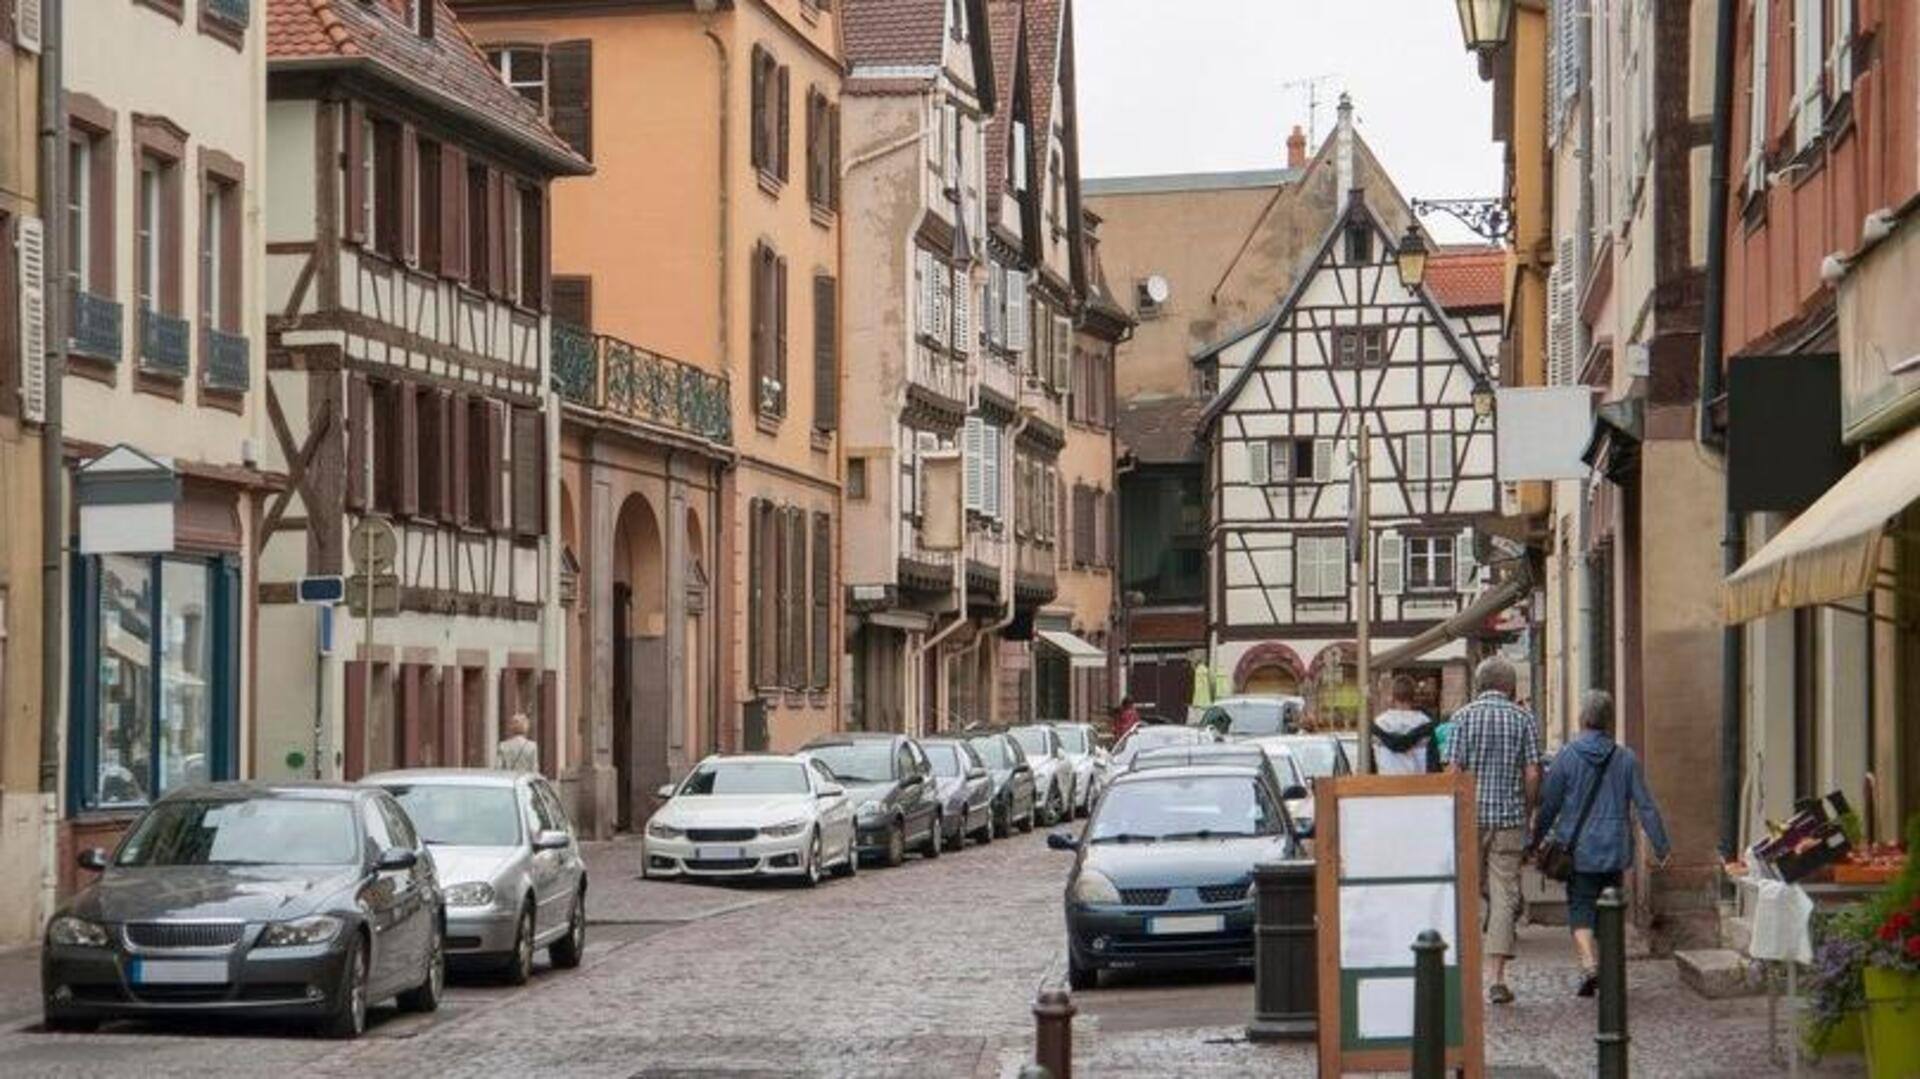 Travel to Colmar, France for a fairytale escape